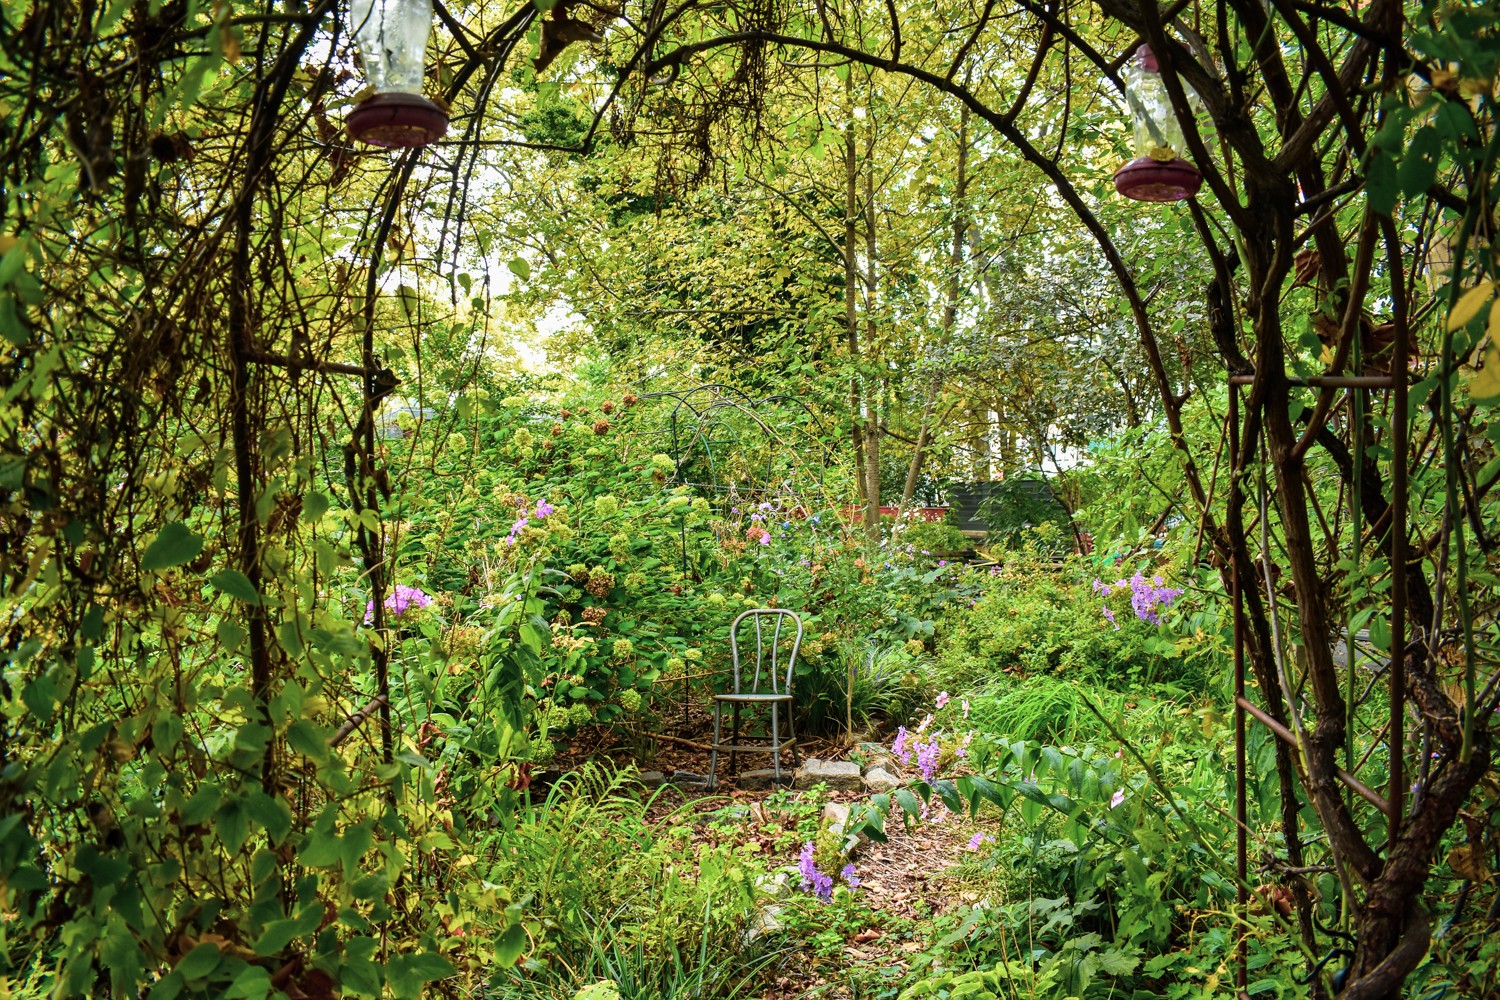 Past a floral archway, a lone chair is seen in the midst of a bountiful, lush garden full of vibrant plants and flowers